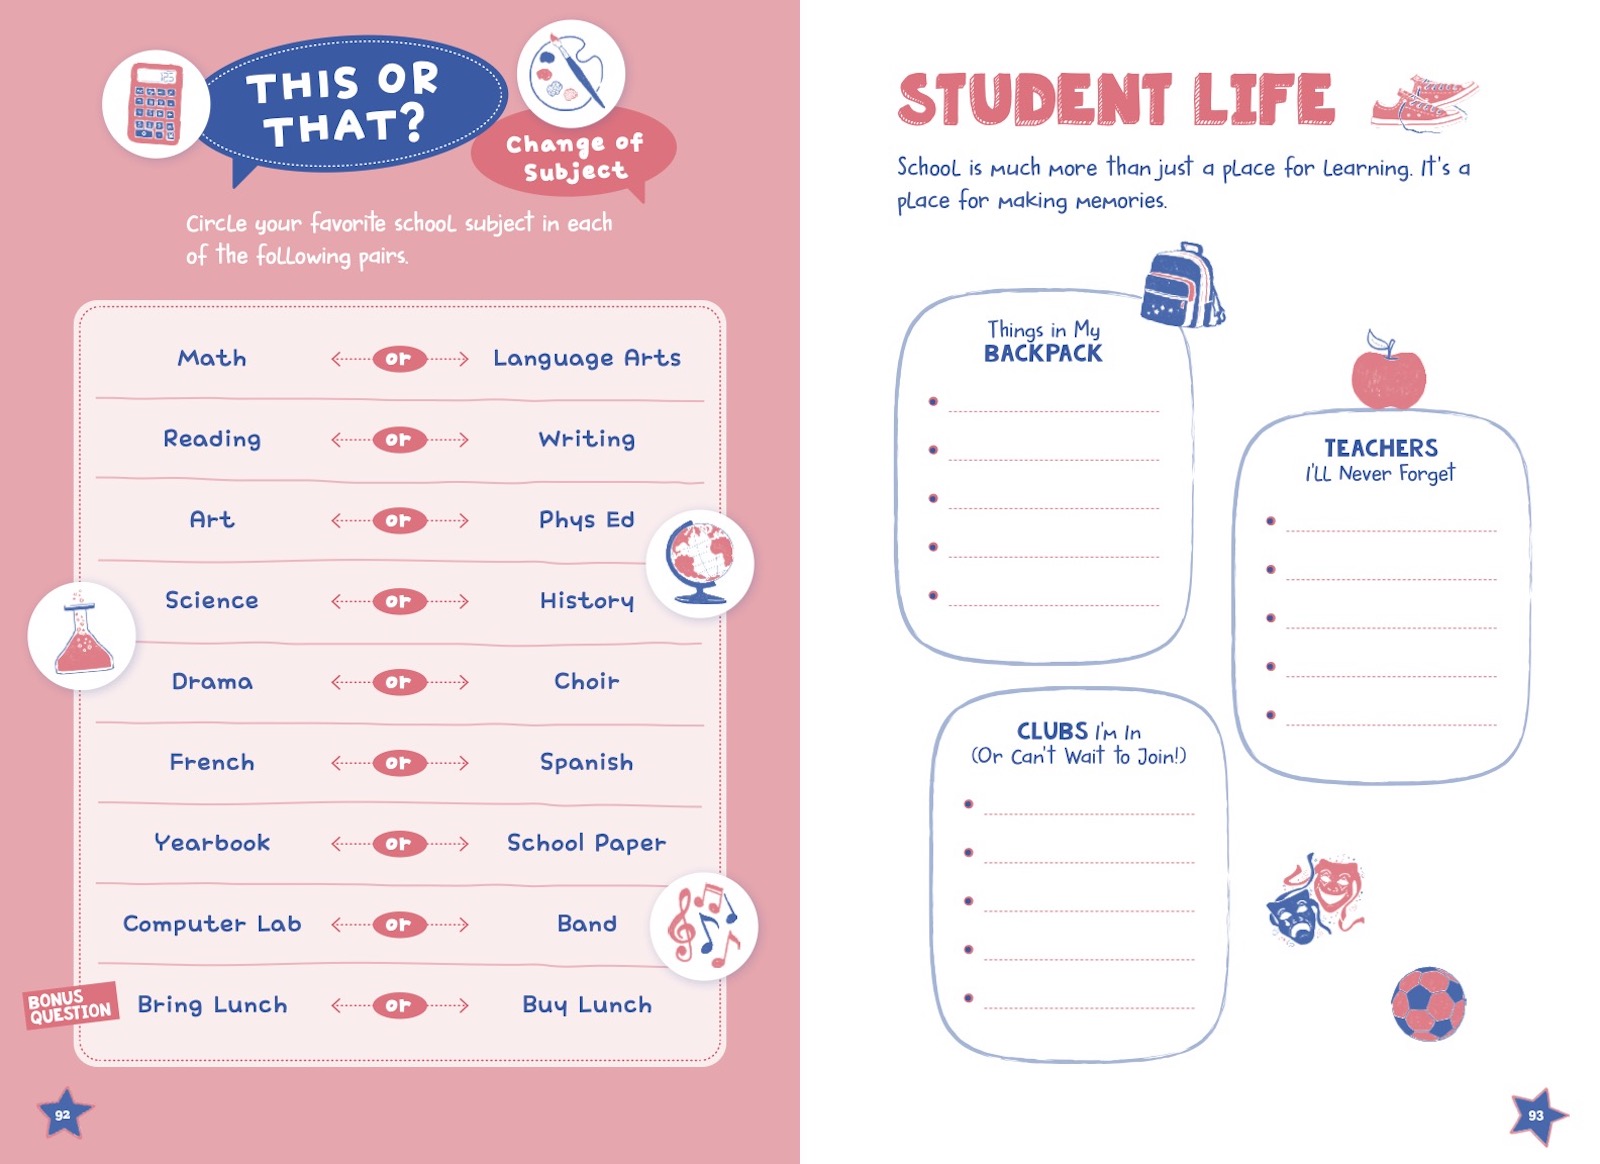 The left side of this image has a light pink background with school subject icons and is a “This or That” writing activity where readers can circle their favorite school subject. On the right side of the image there is another example of a writing activity which asks students to write down specifics of their own school life like what clubs they’re in and is against a white background. 